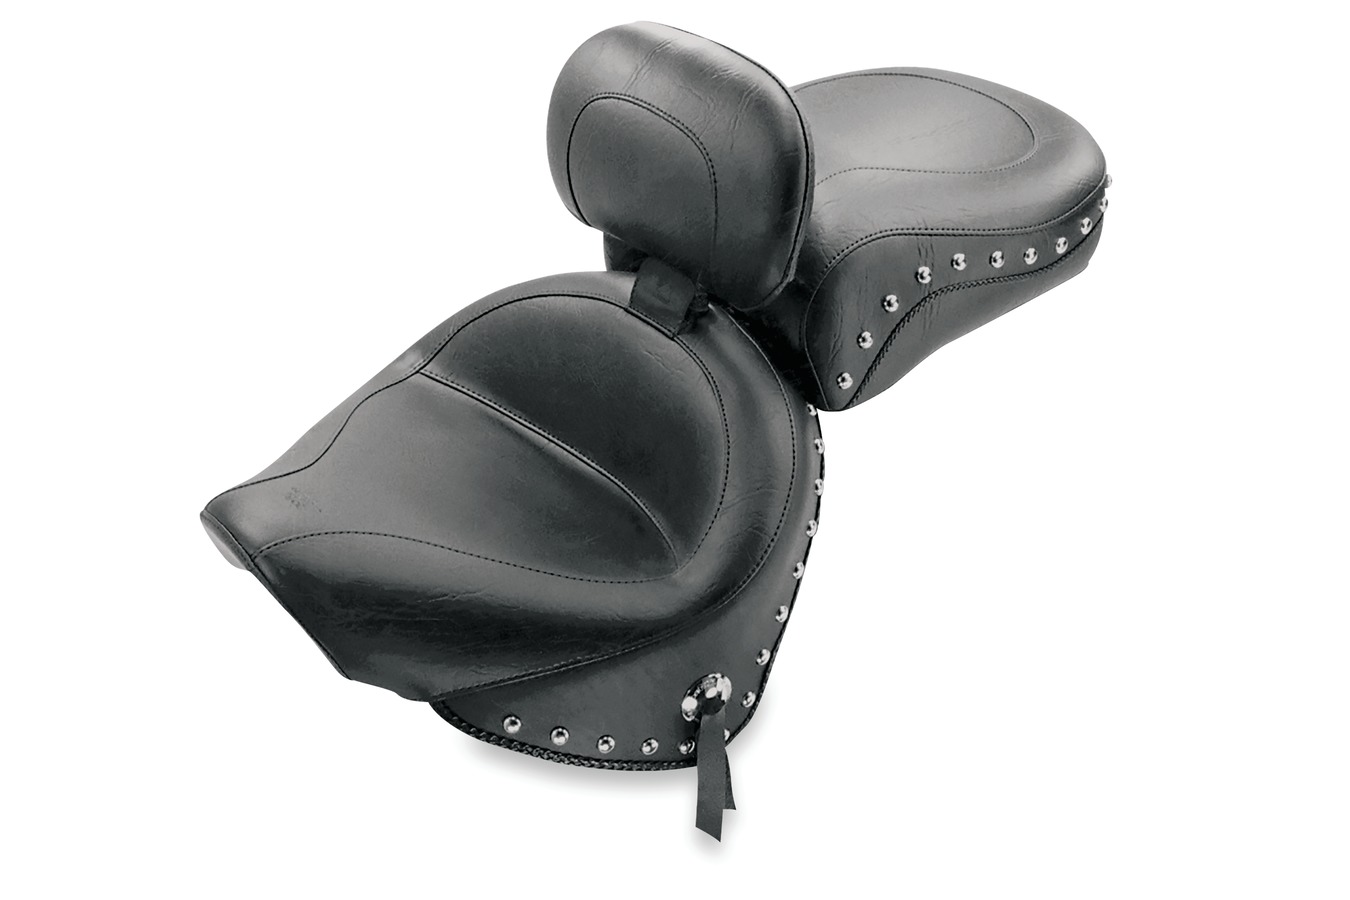 Wide Touring Two-Piece Seat with Driver Backrest for Yamaha V-Star 1100 Classic 2000-